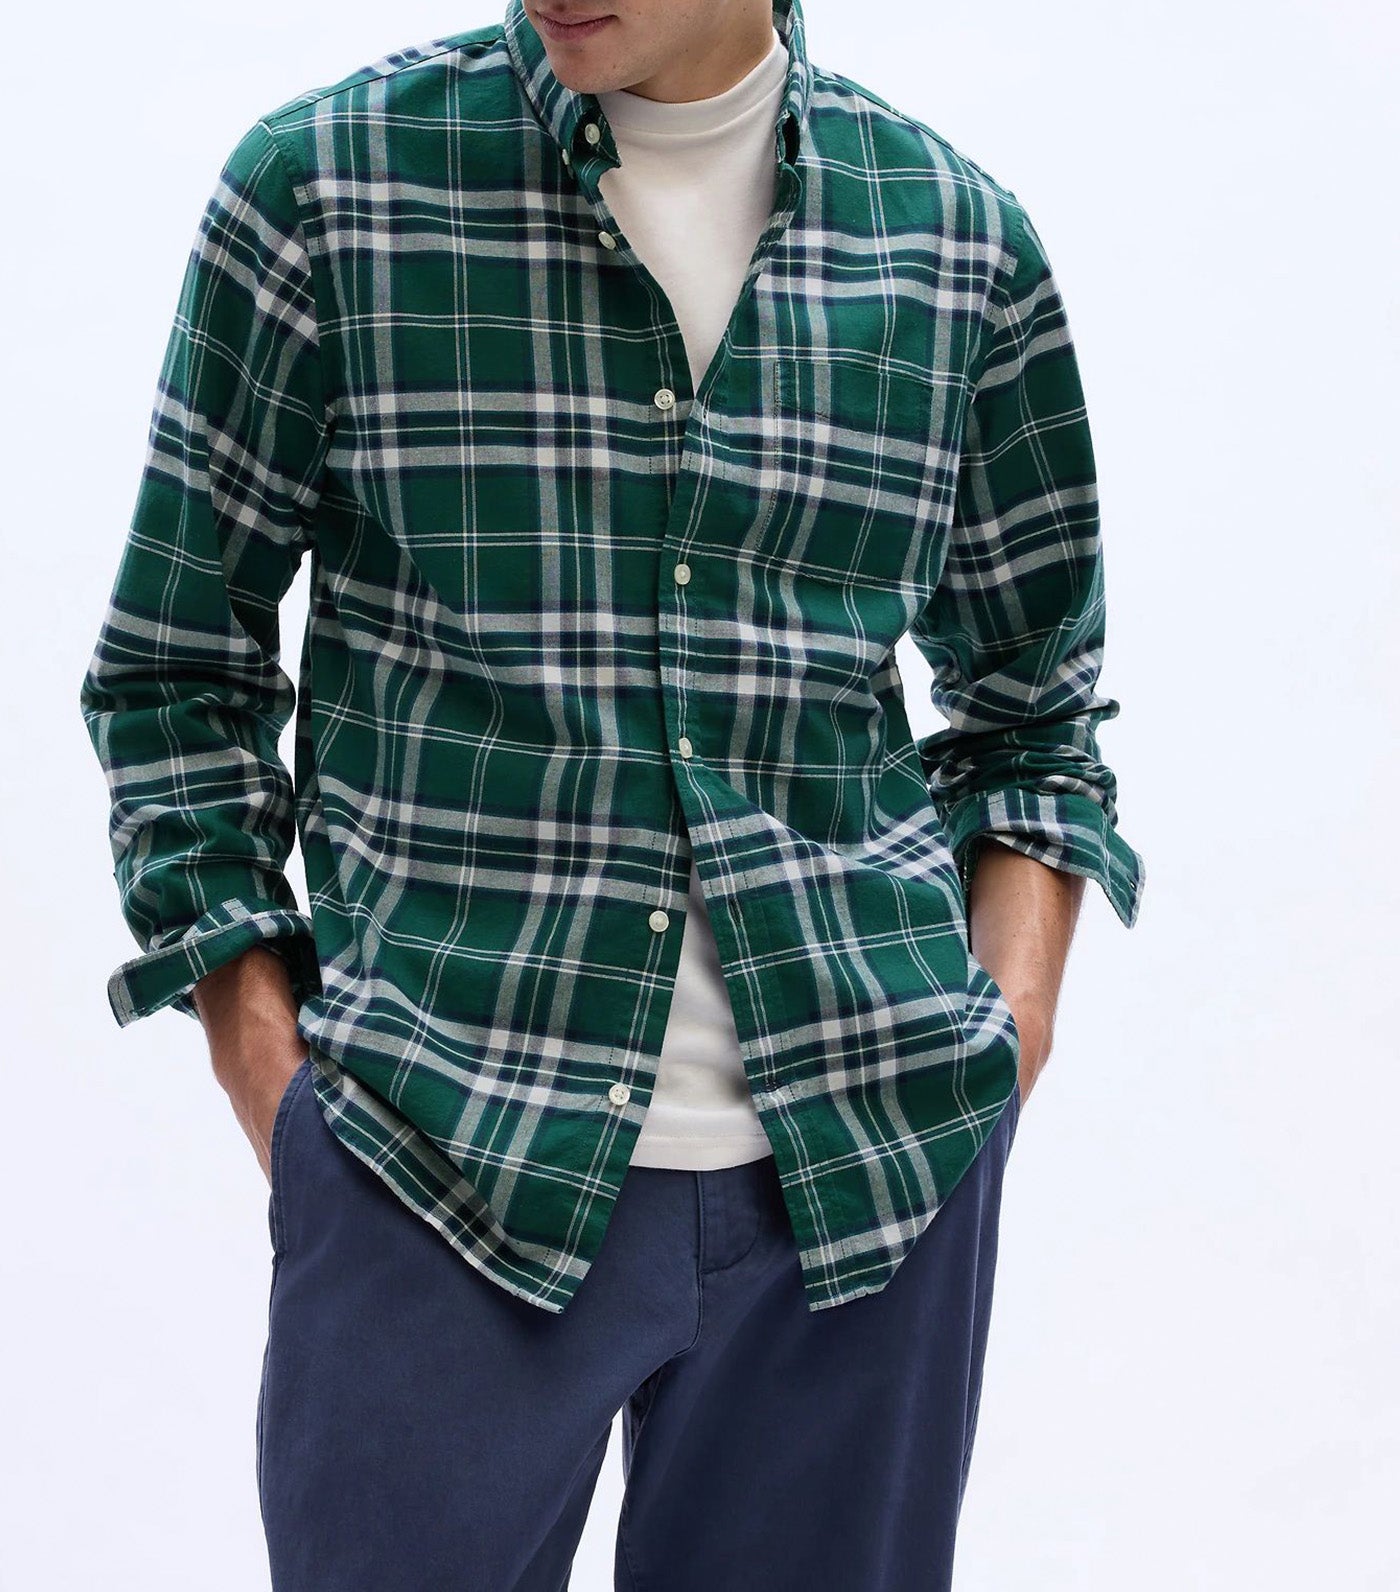 Oxford Shirt In Standard Fit June Bug Plaid